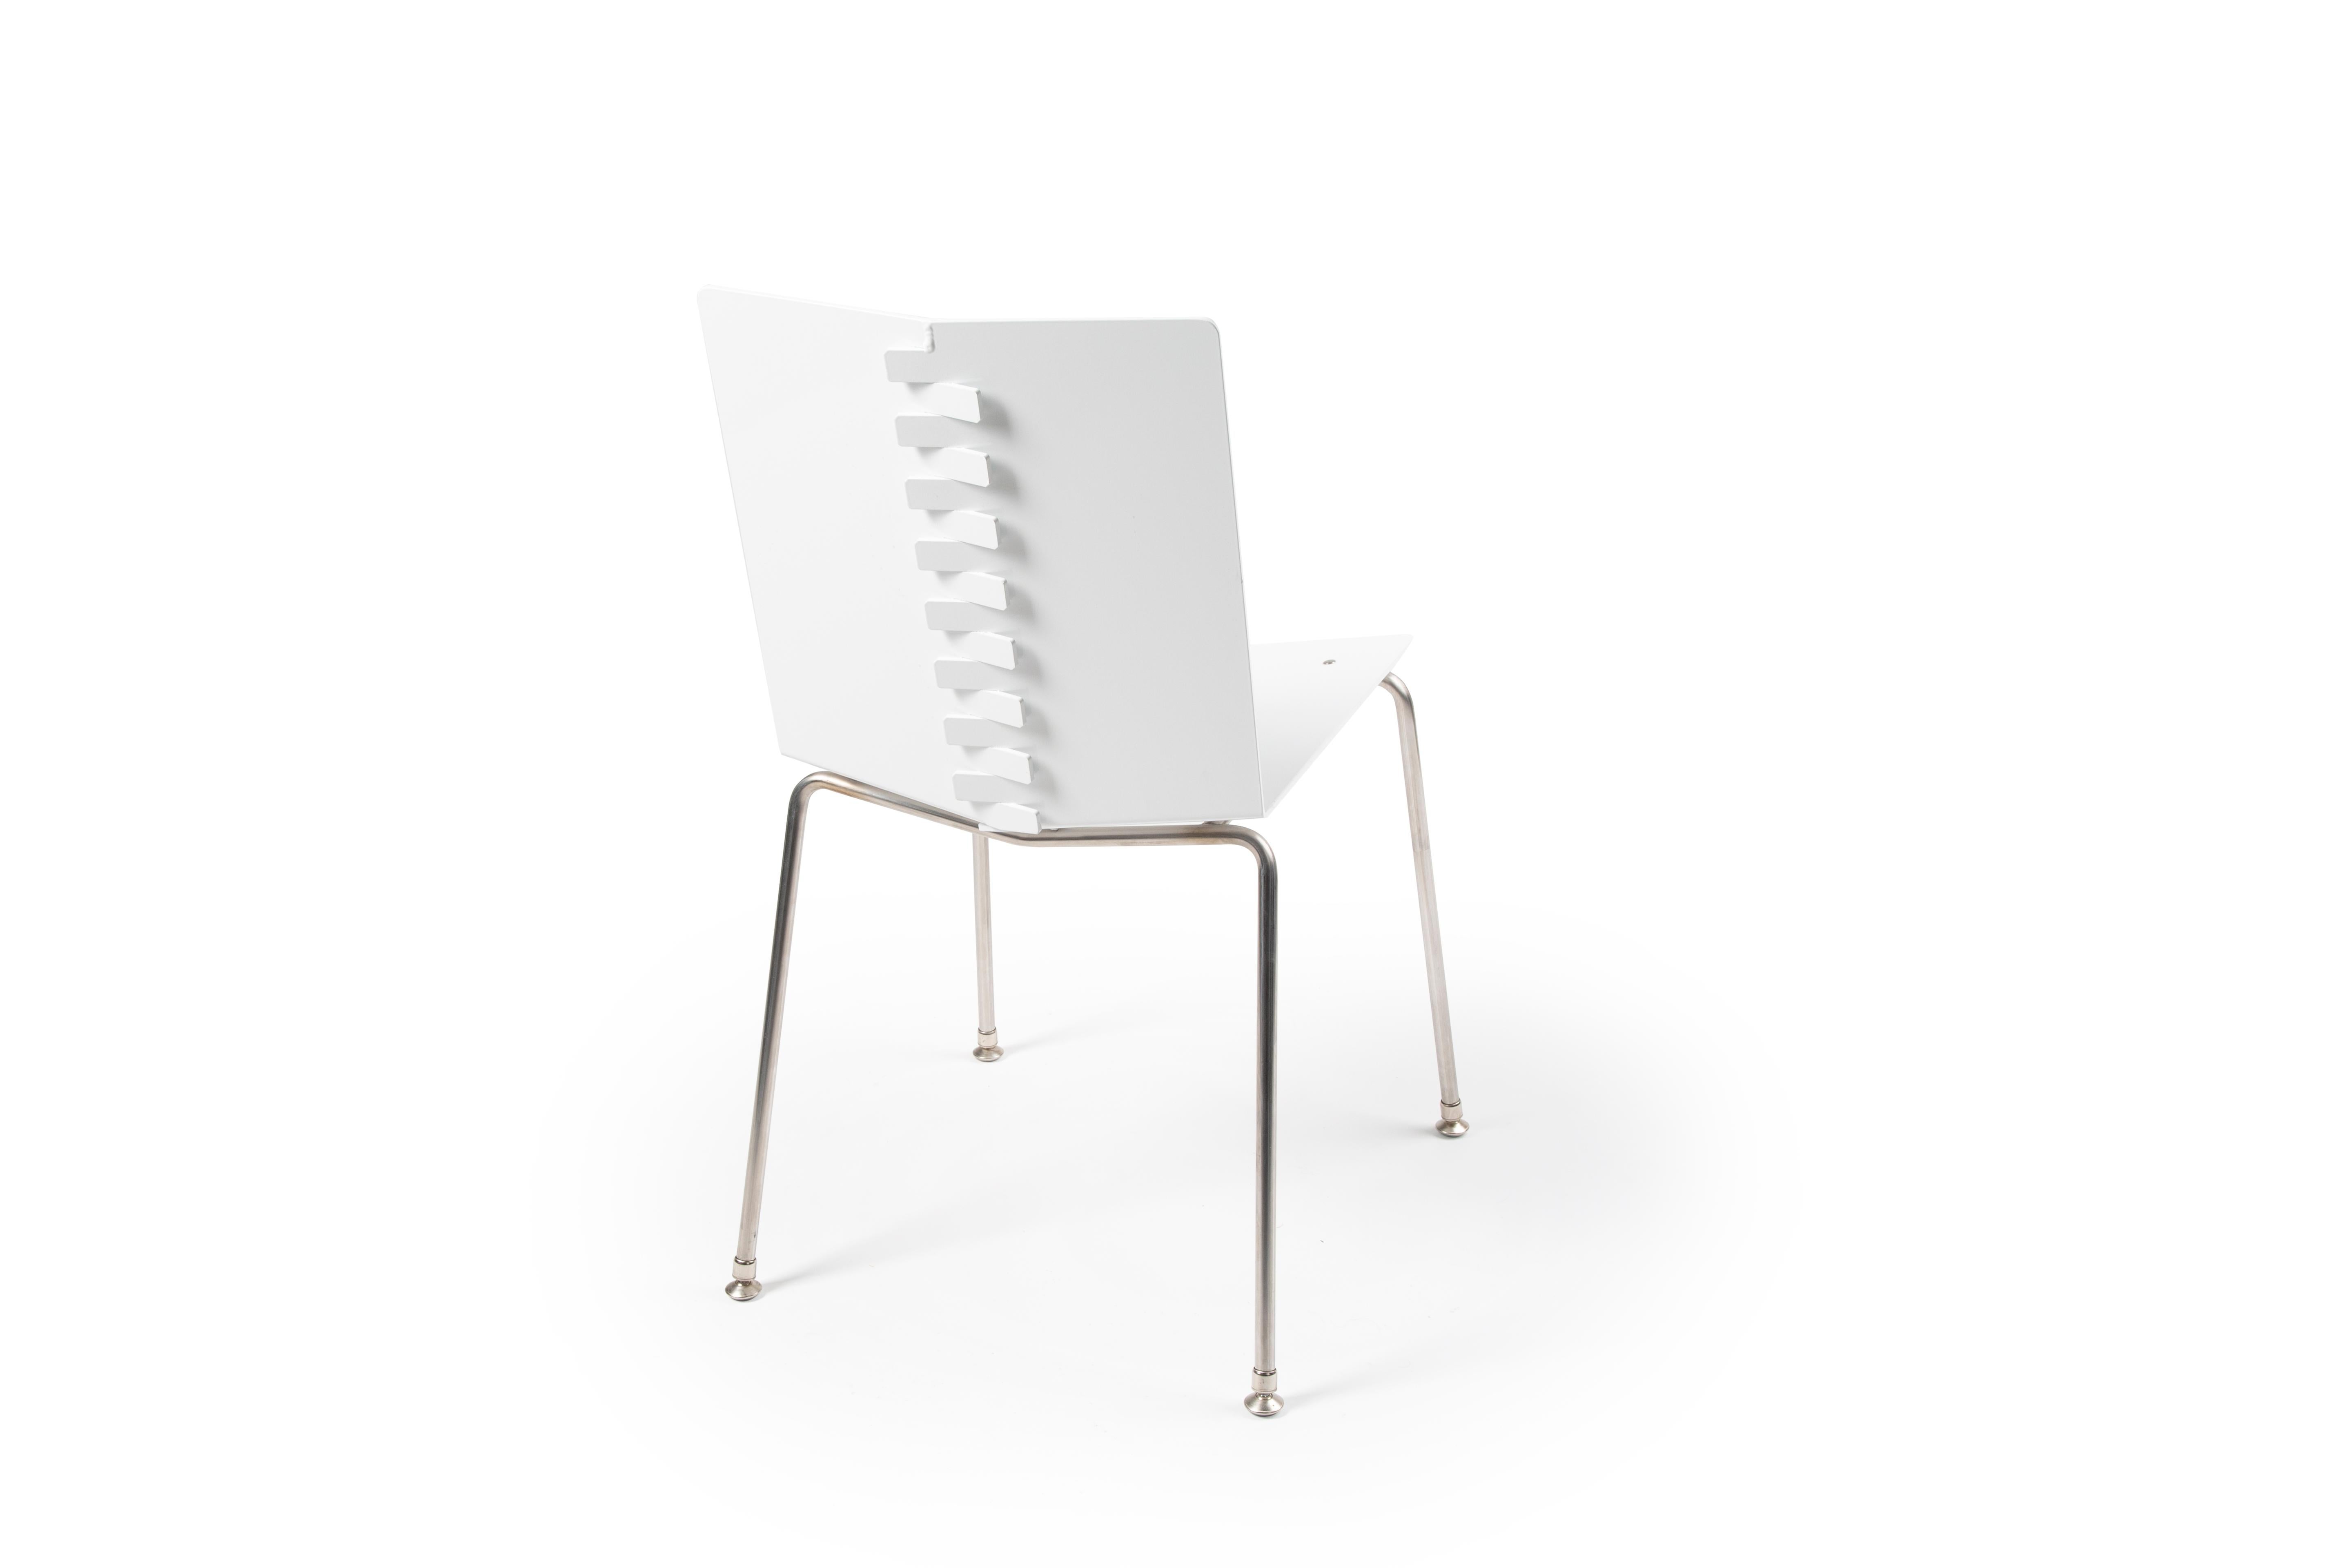 Minimal Modern Exterior Dining Chair Powder Coated with Stainless Steel Legs In New Condition For Sale In Bozeman, MT